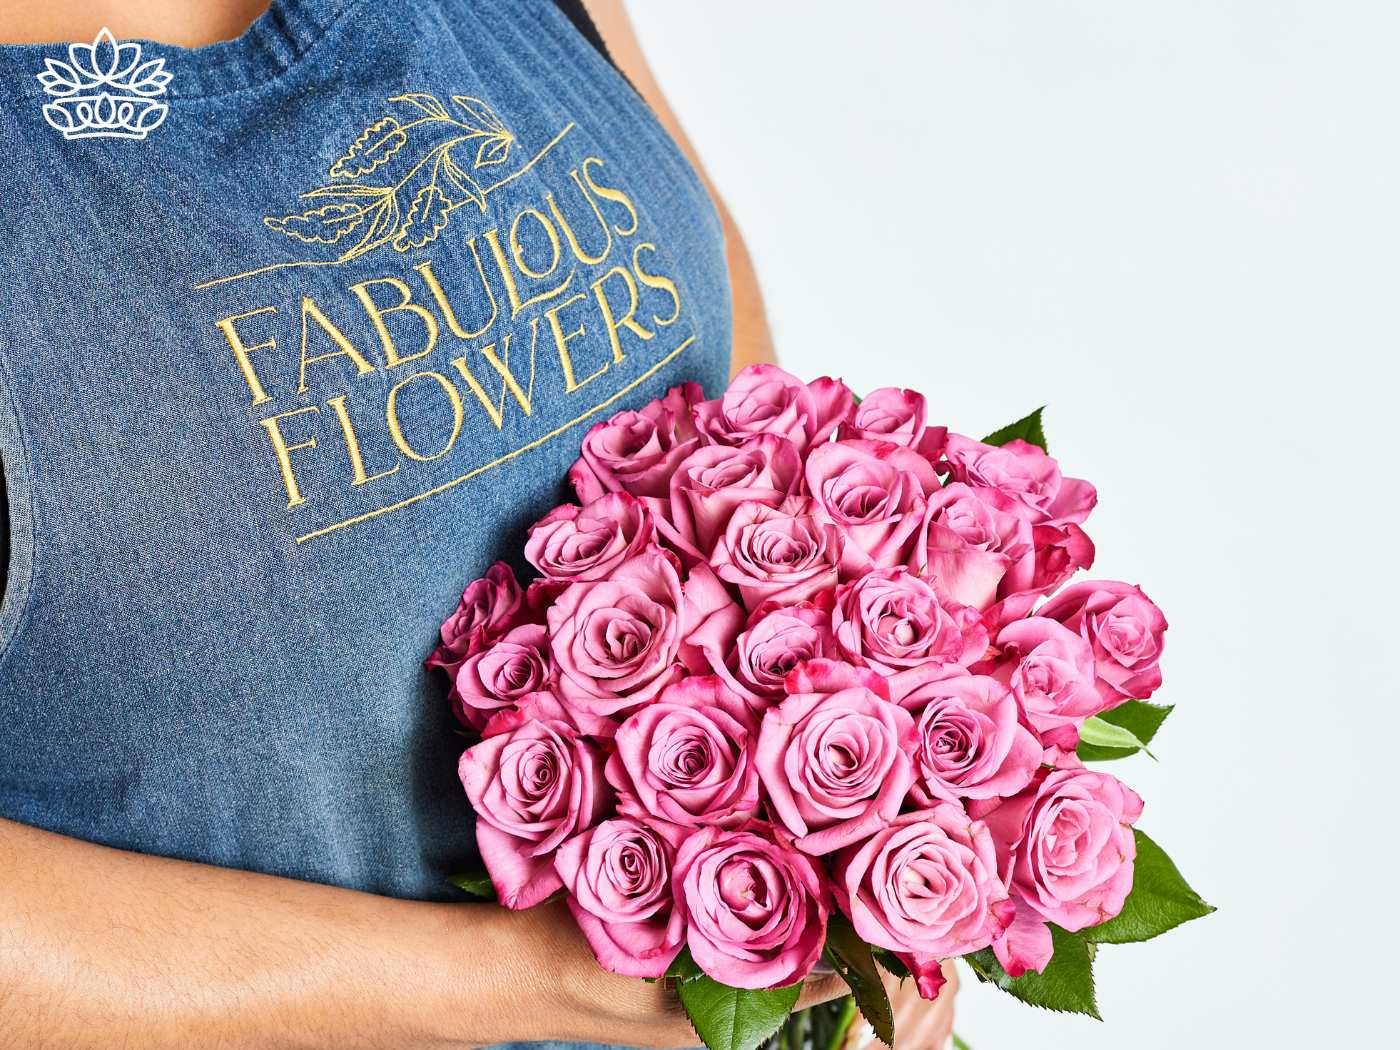 A florist wearing a denim apron embroidered with 'Fabulous Flowers' cradles a bouquet of vibrant pink roses, symbolizing creativity, beauty, and a thoughtful gift idea. Fabulous Flowers and Gifts. Gifts for Her.